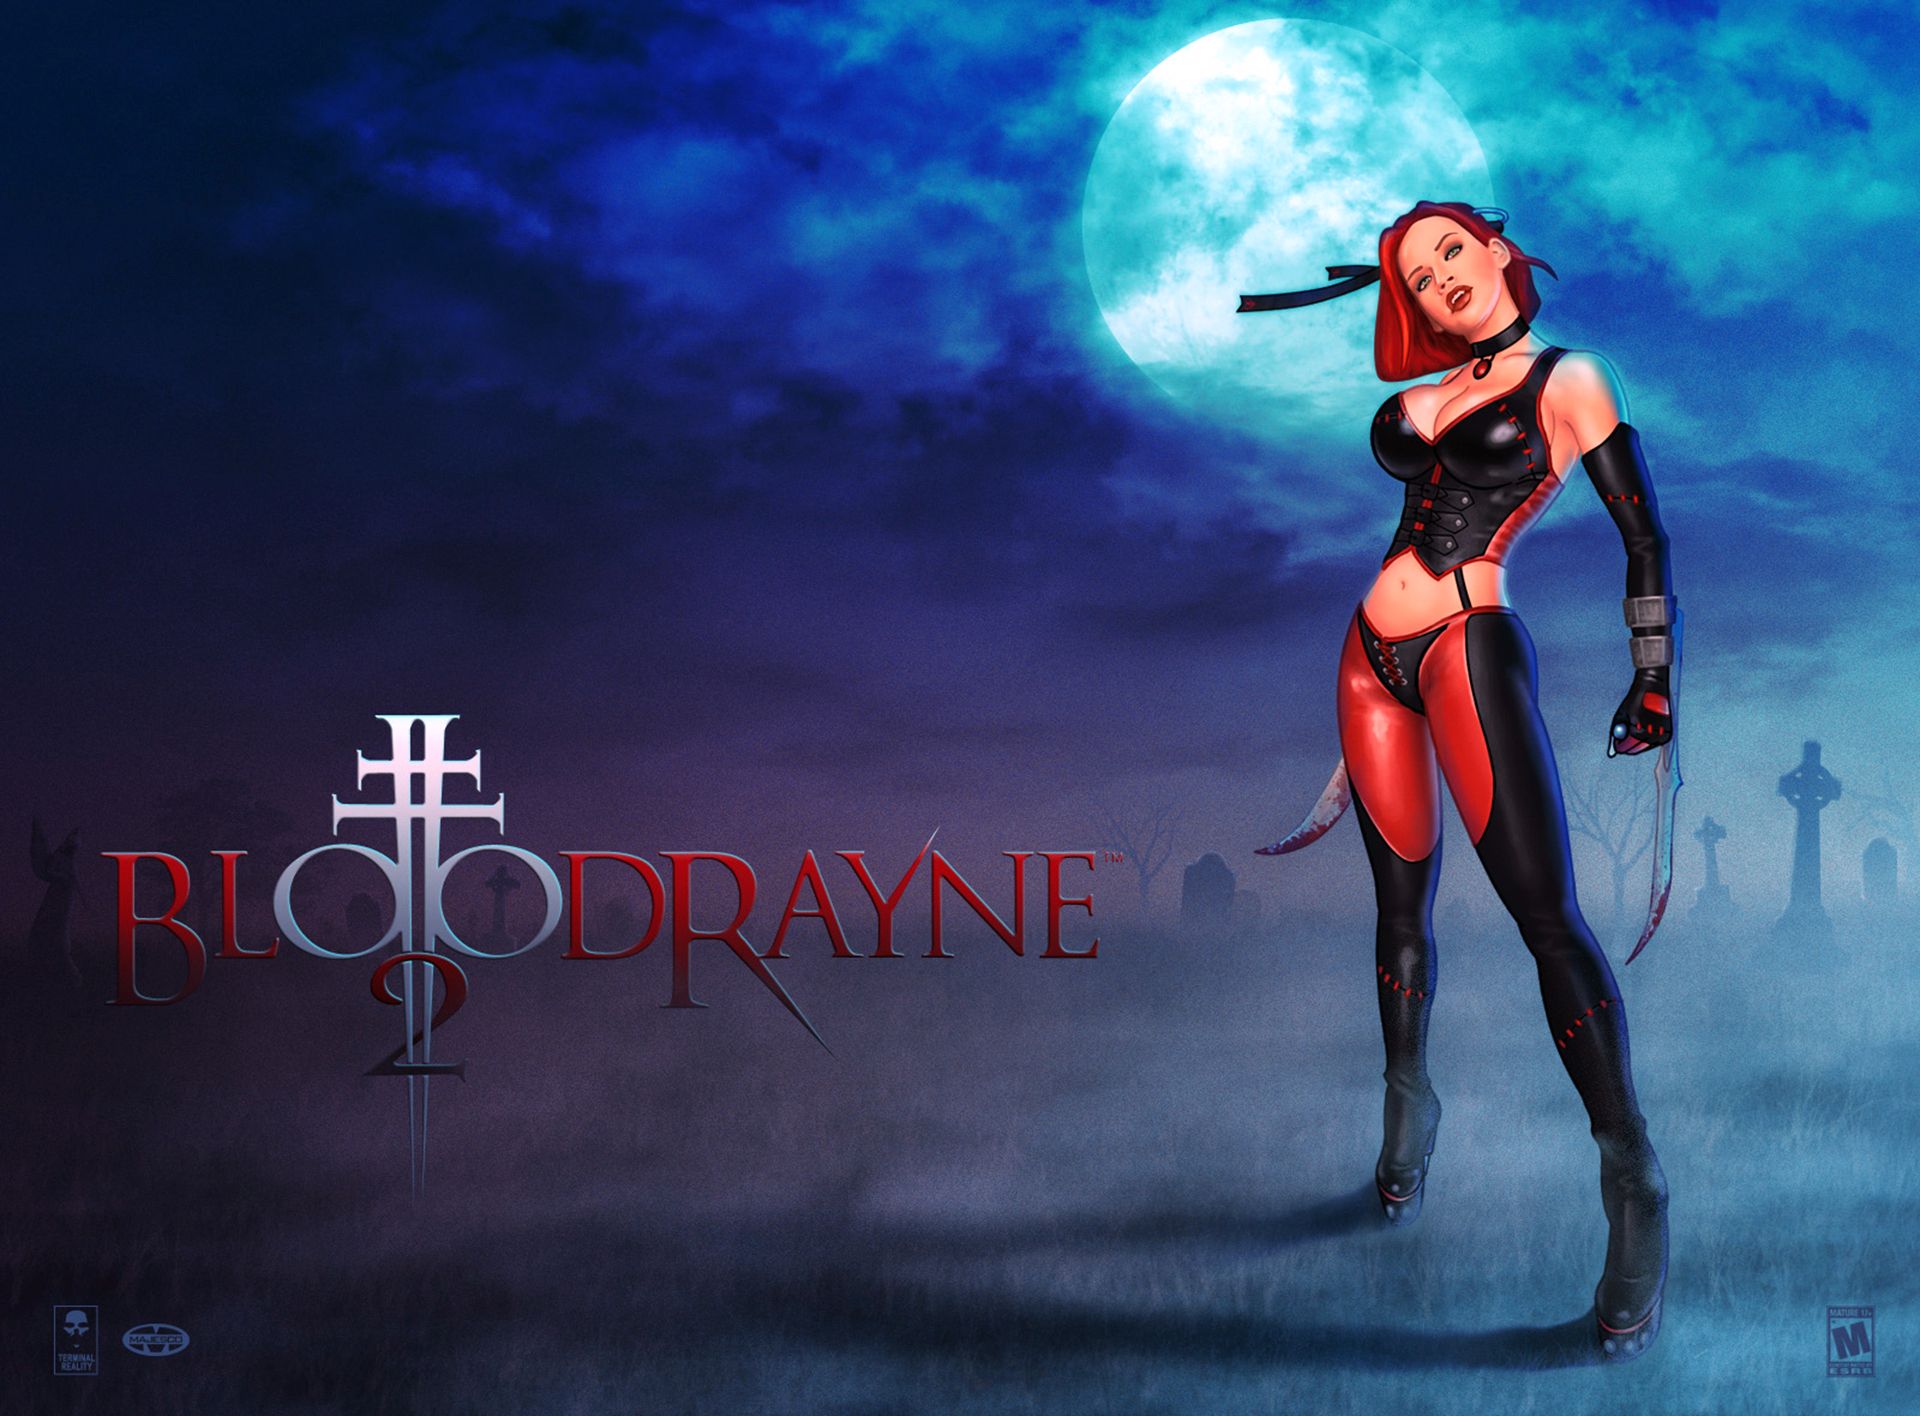 Bloodrayne HD Wallpaper And Background Image